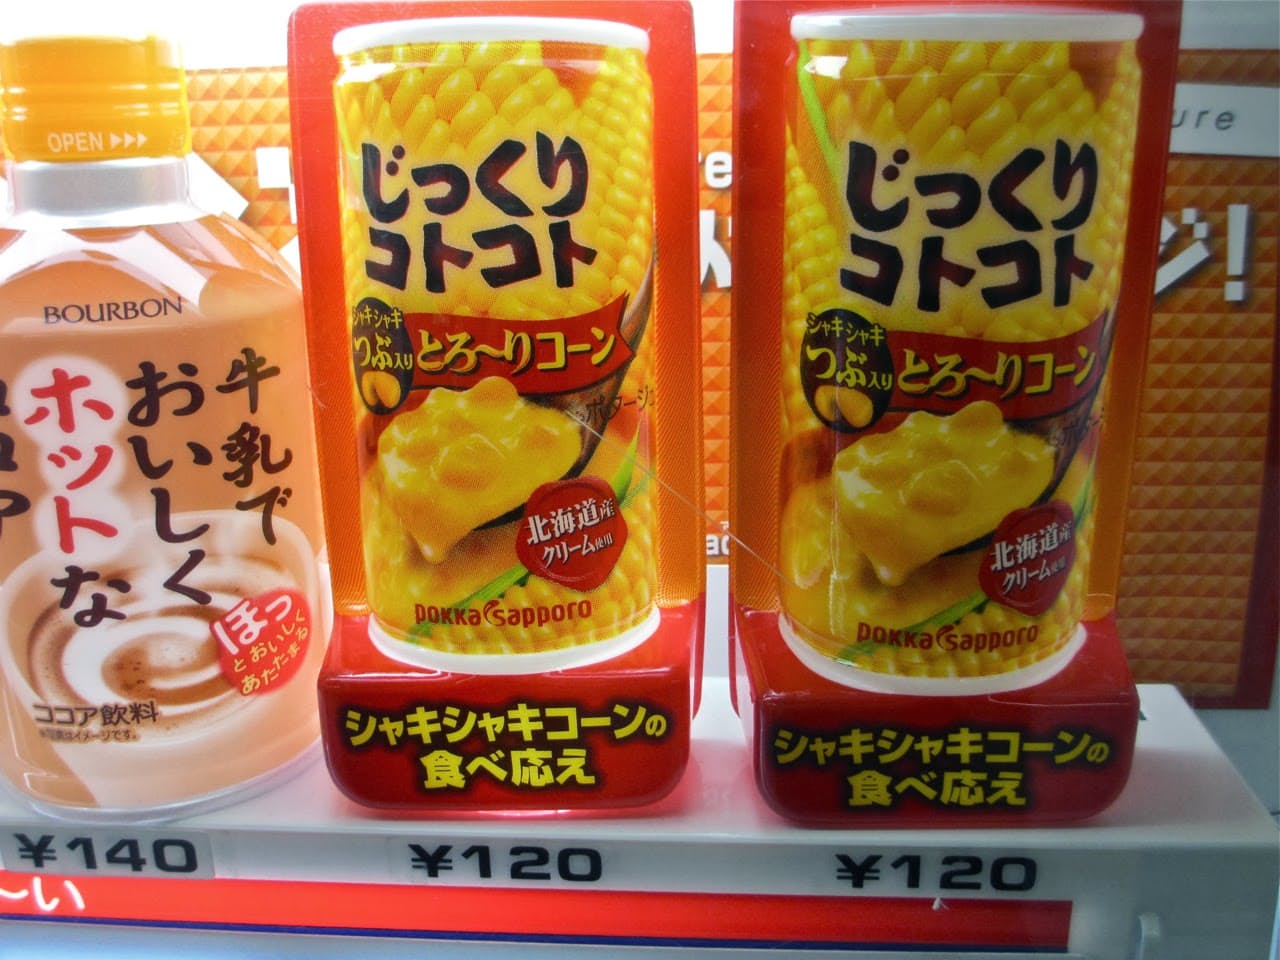 Corn soup. You can buy it cold or wait for it to be warmed up. The corn soup is a French delicacy that is a major hit in Japan.